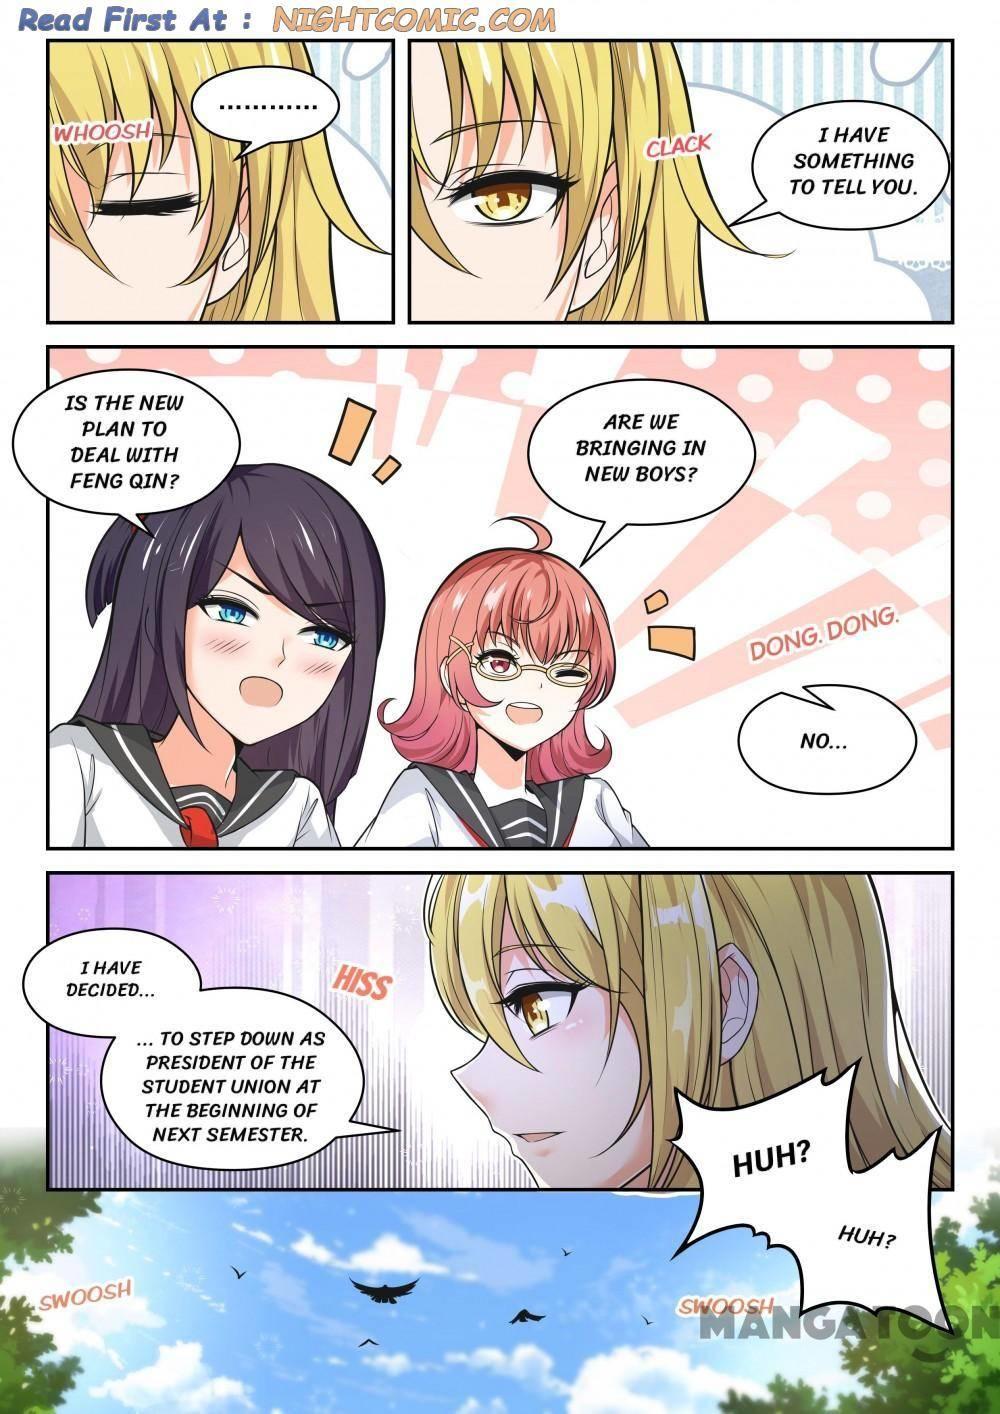 The Boy In The All-Girls School Chapter 473 page 3 - Mangakakalot